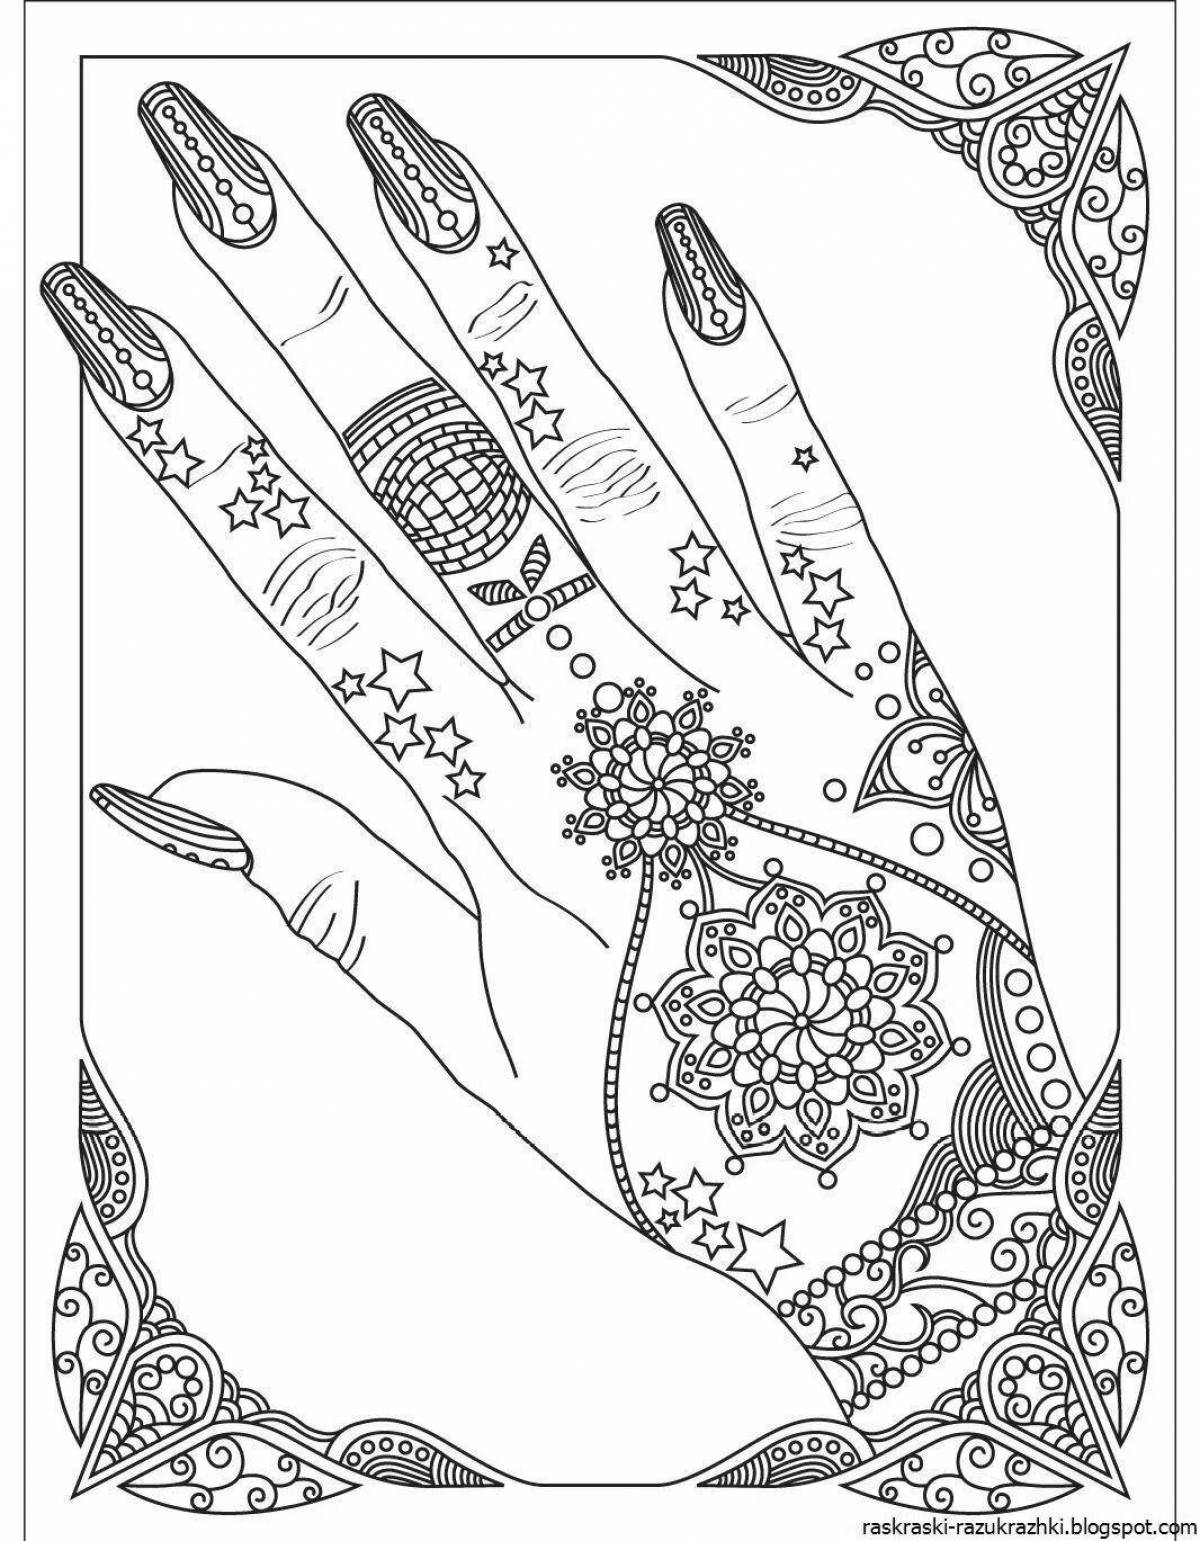 Intricate nail design coloring page